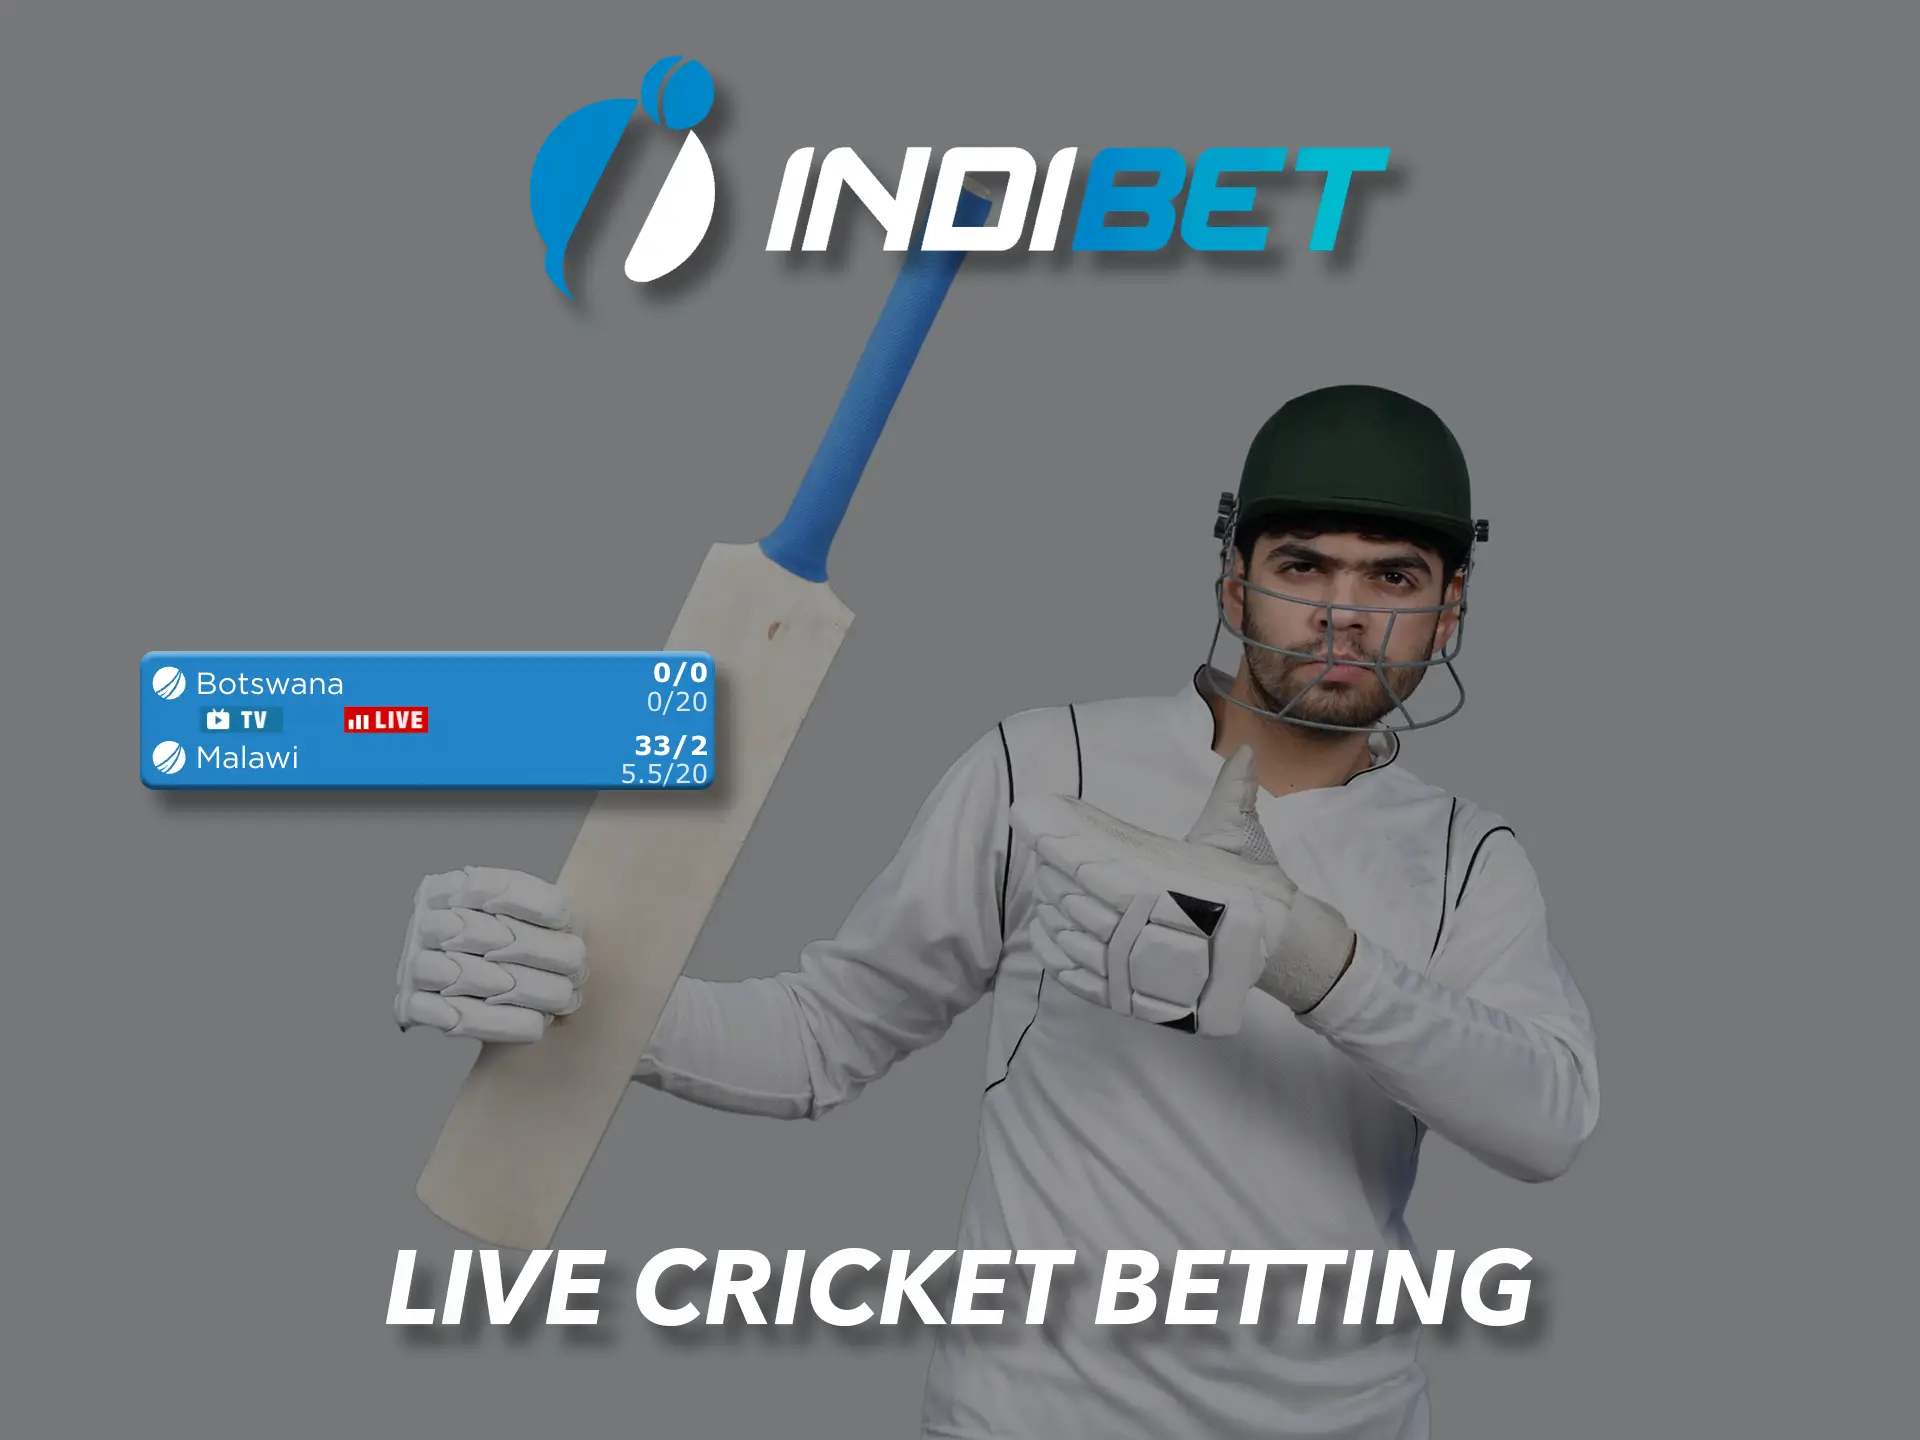 Browse matches on Indibet and make your outcomes by assessing the situation on the field.